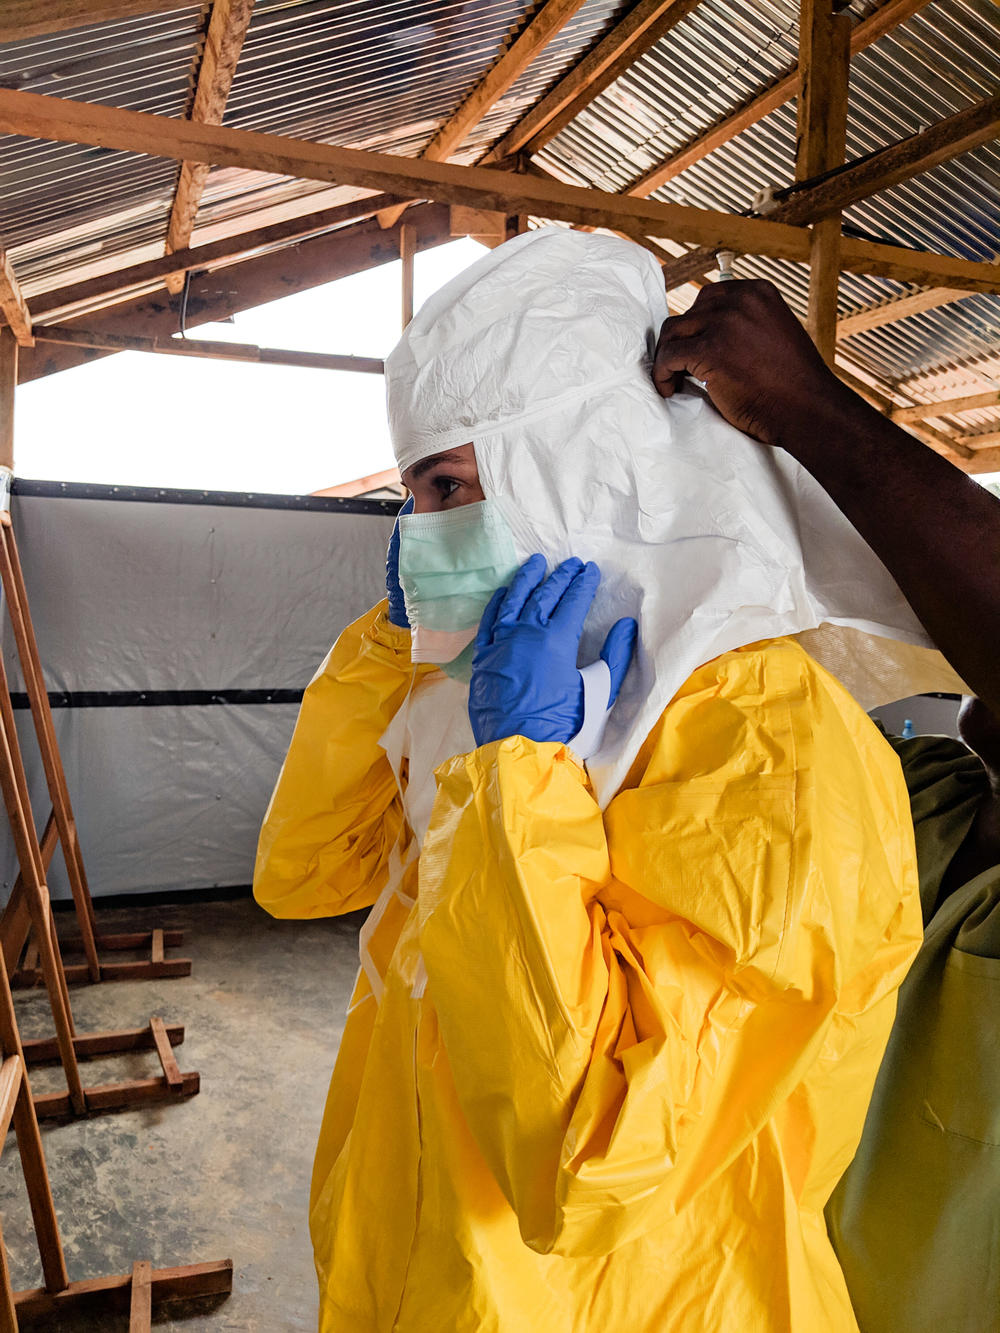 Karin Huster donning her protective gear in an Ebola ward, where medical teams tried to come up with ways to compensate for the lack of human touch.